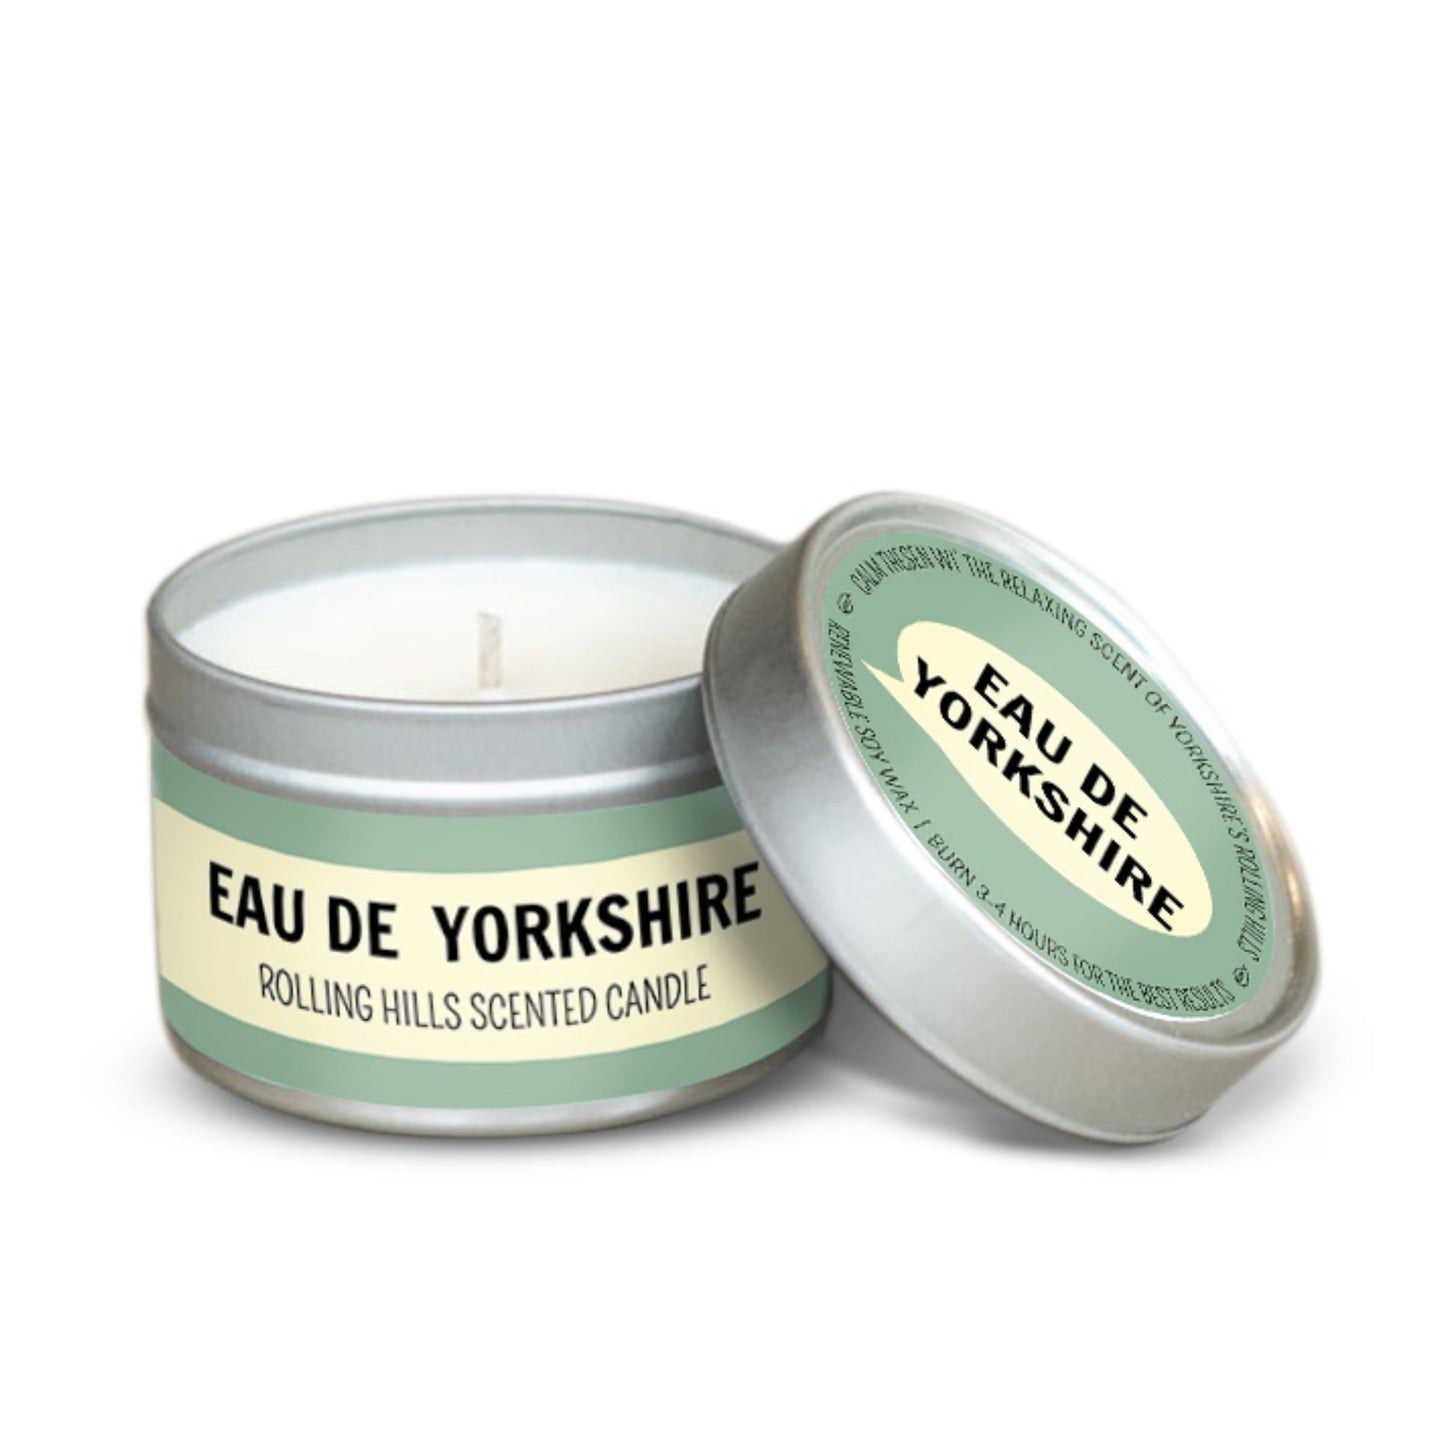 Rolling Hills Eau De Yorkshire Scented Candle - The Great Yorkshire Shop